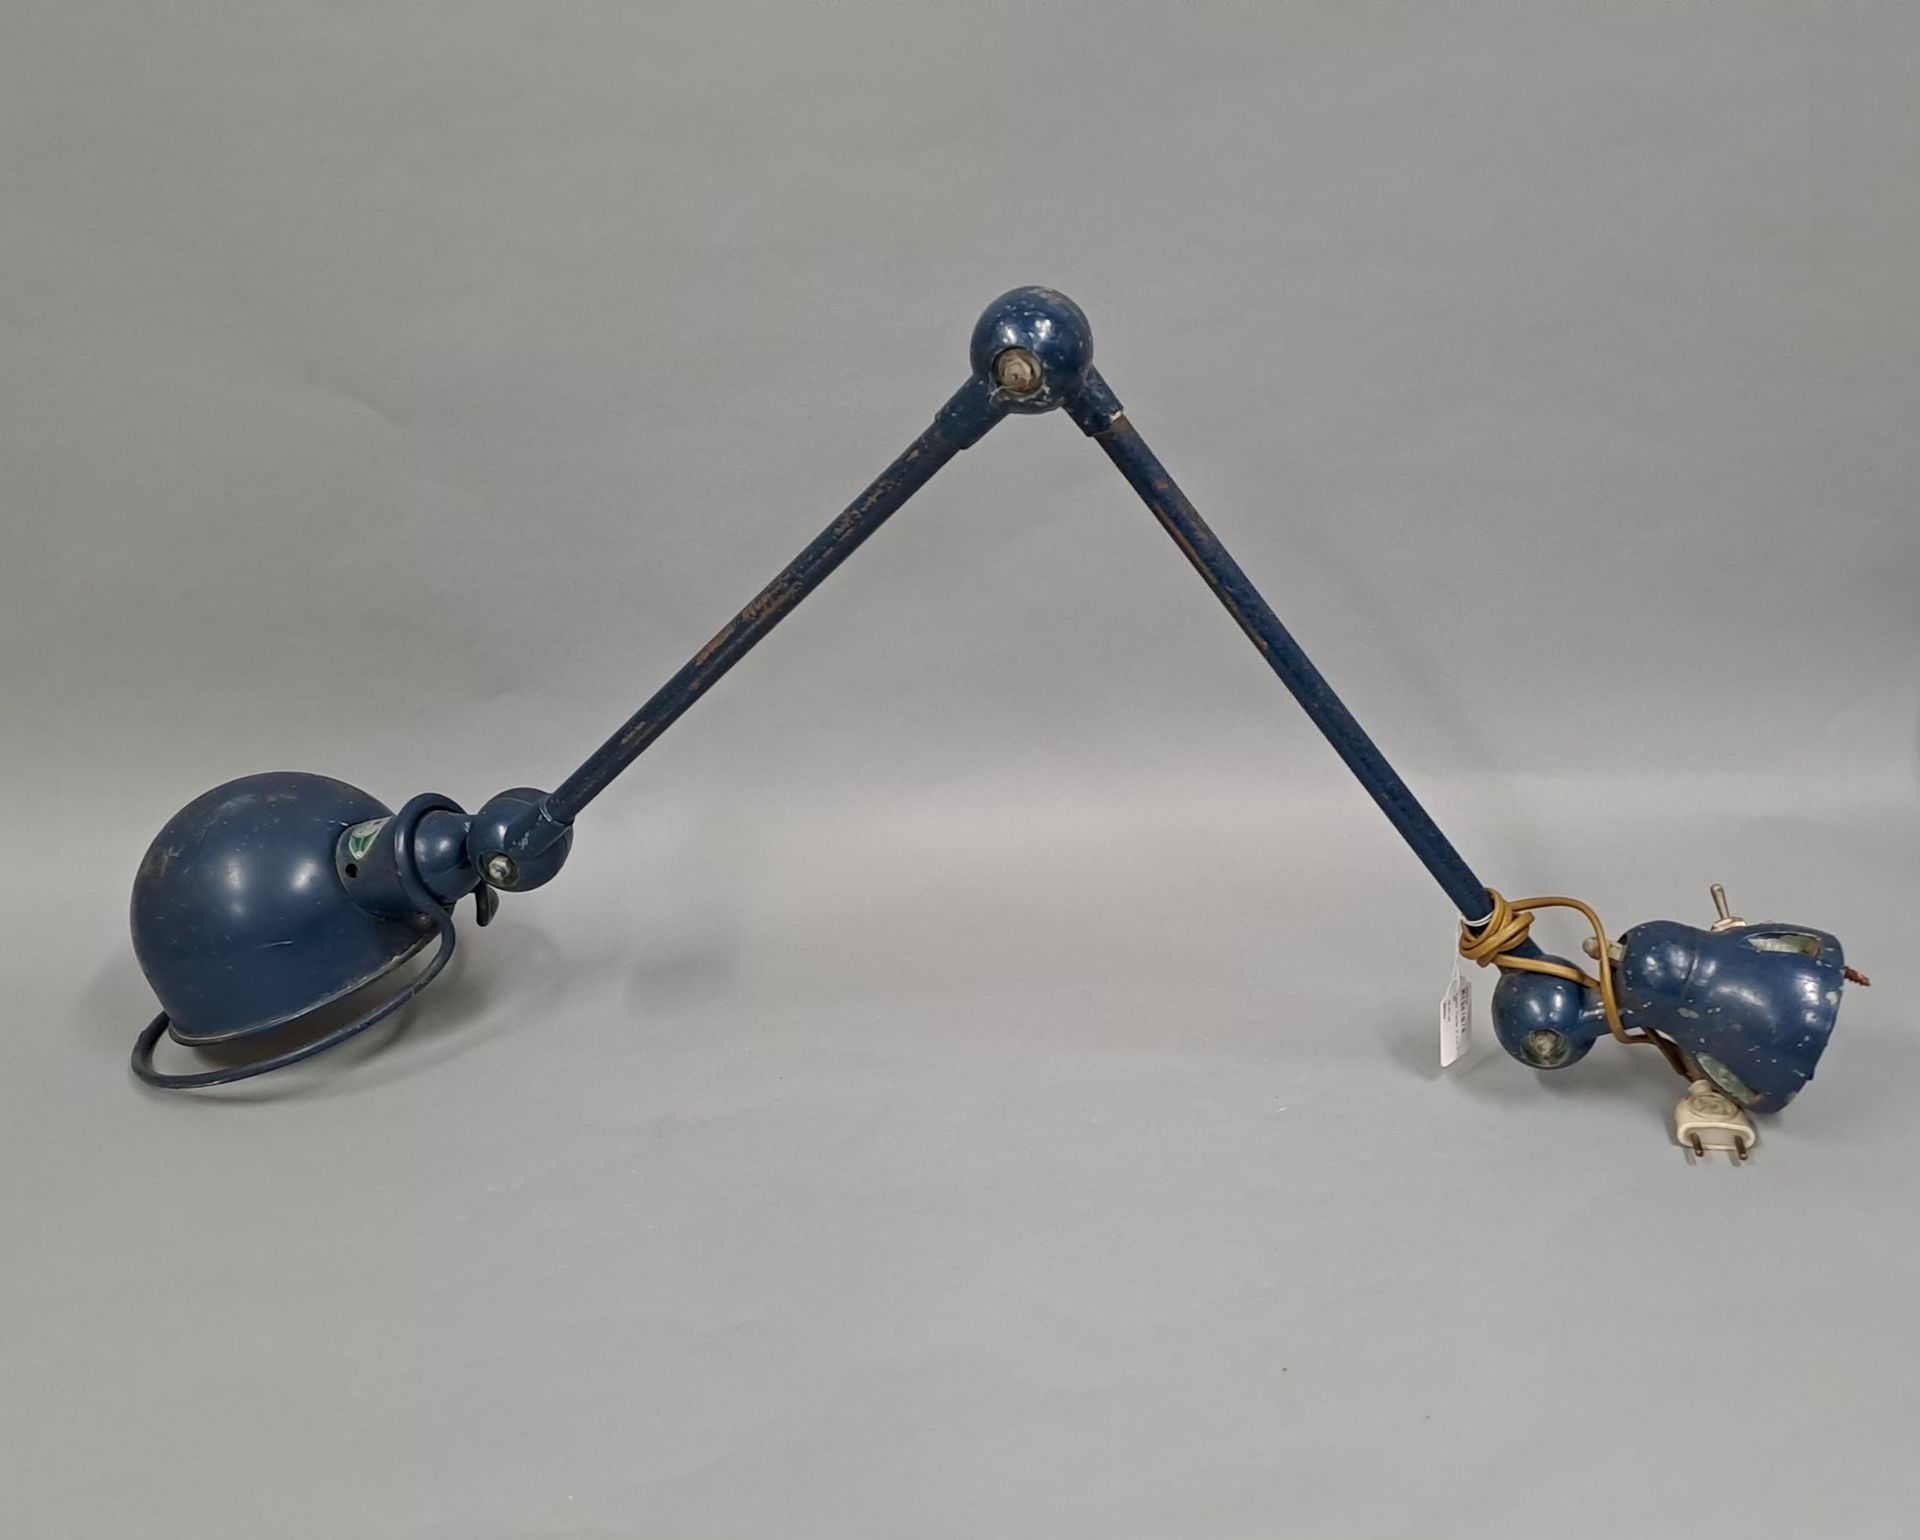 Null JIELDE

Articulated workshop lamp with two arms, painted in blue. With its &hellip;